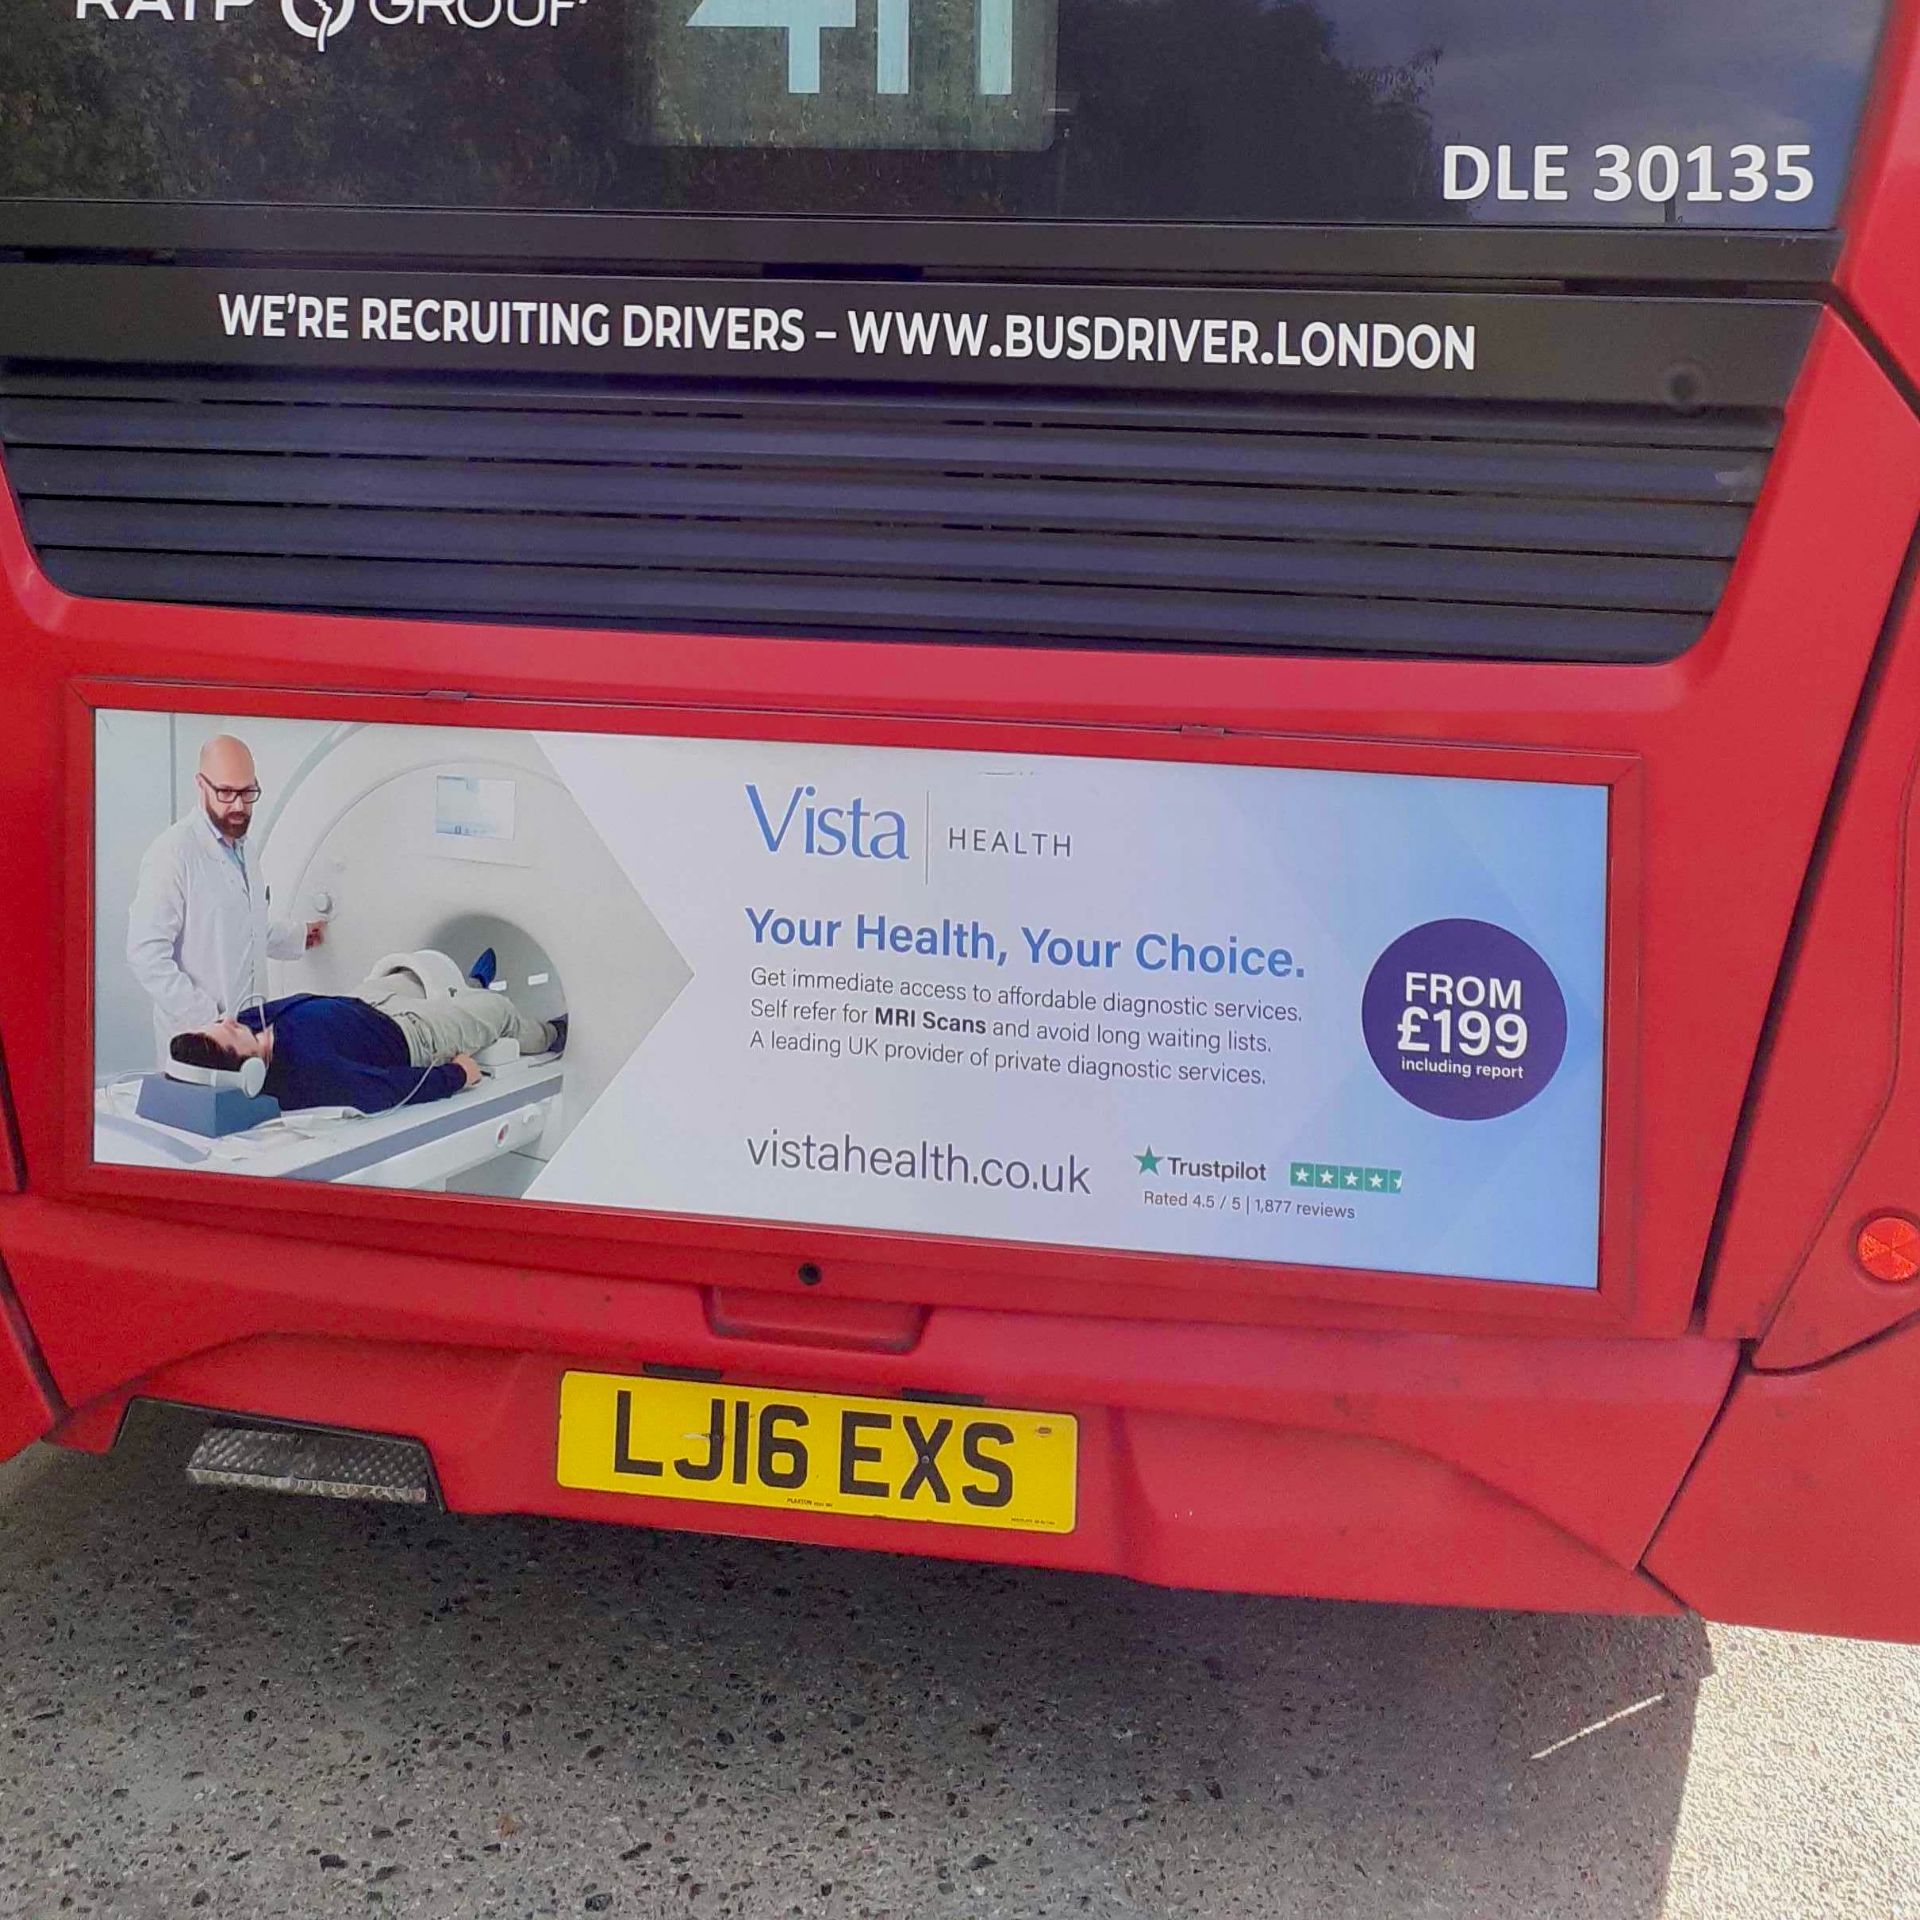 Vista Health Launches Bus Advertising Campaign